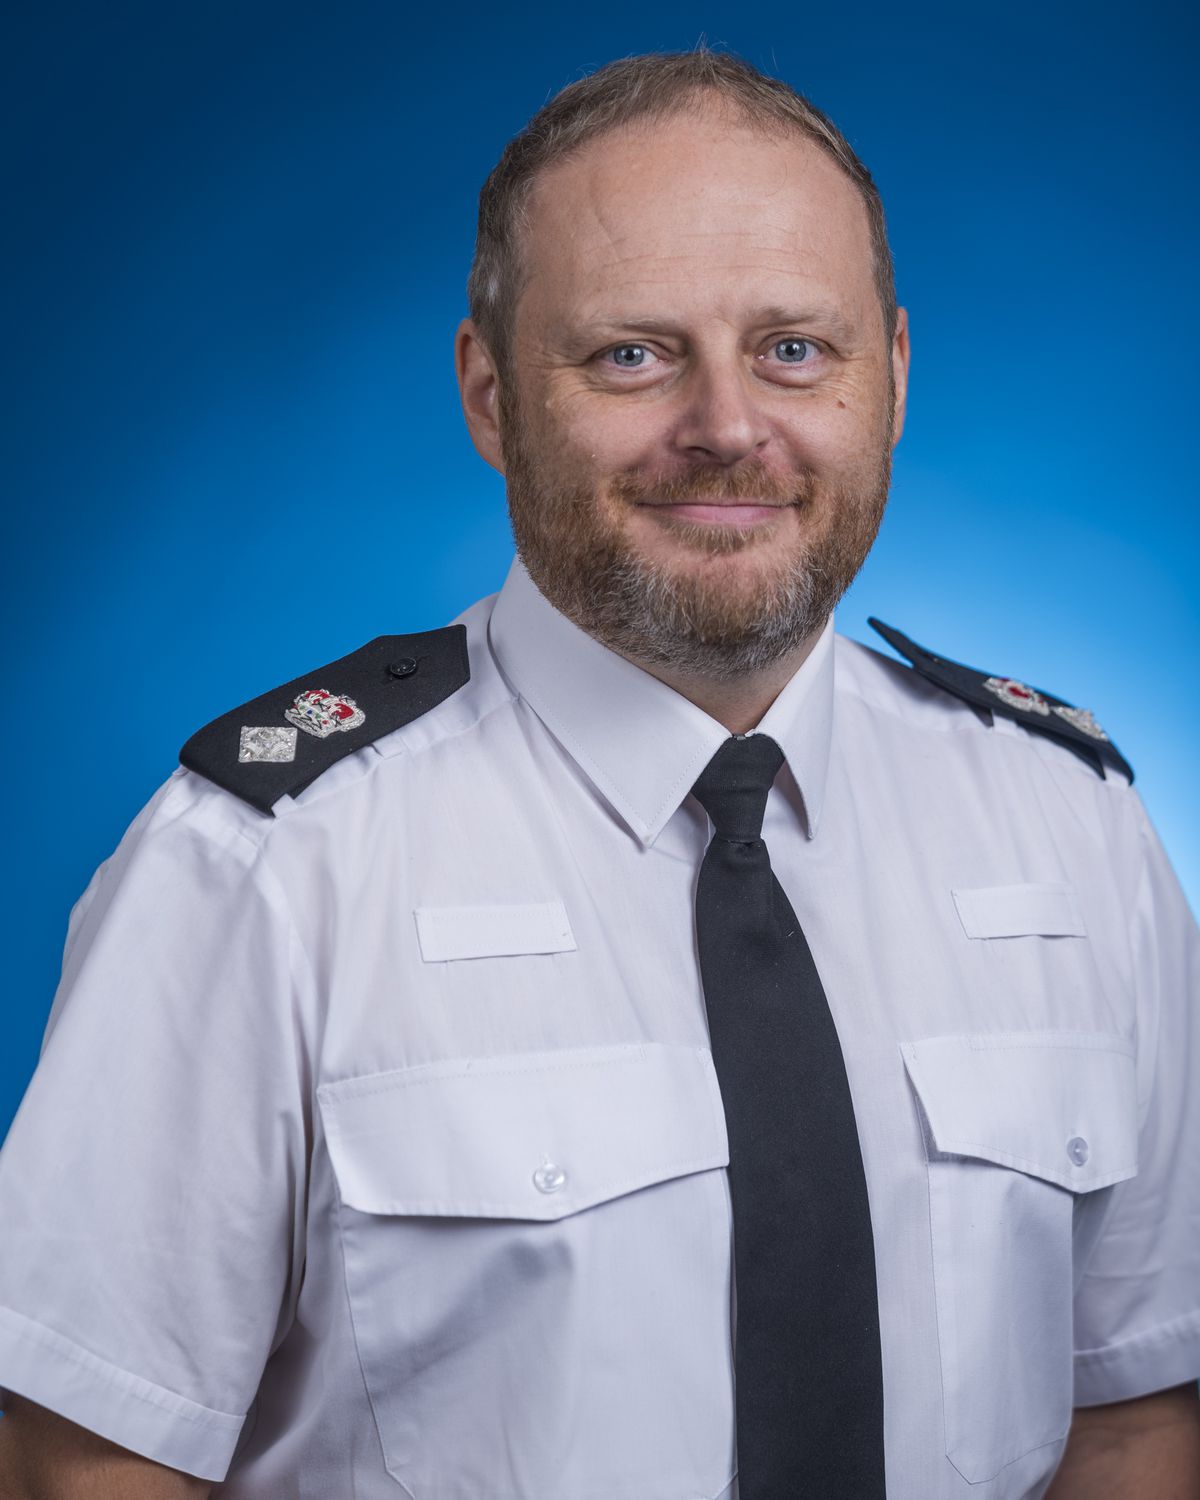 Chief Superintendent Phil Dolby used to be based in Dudley